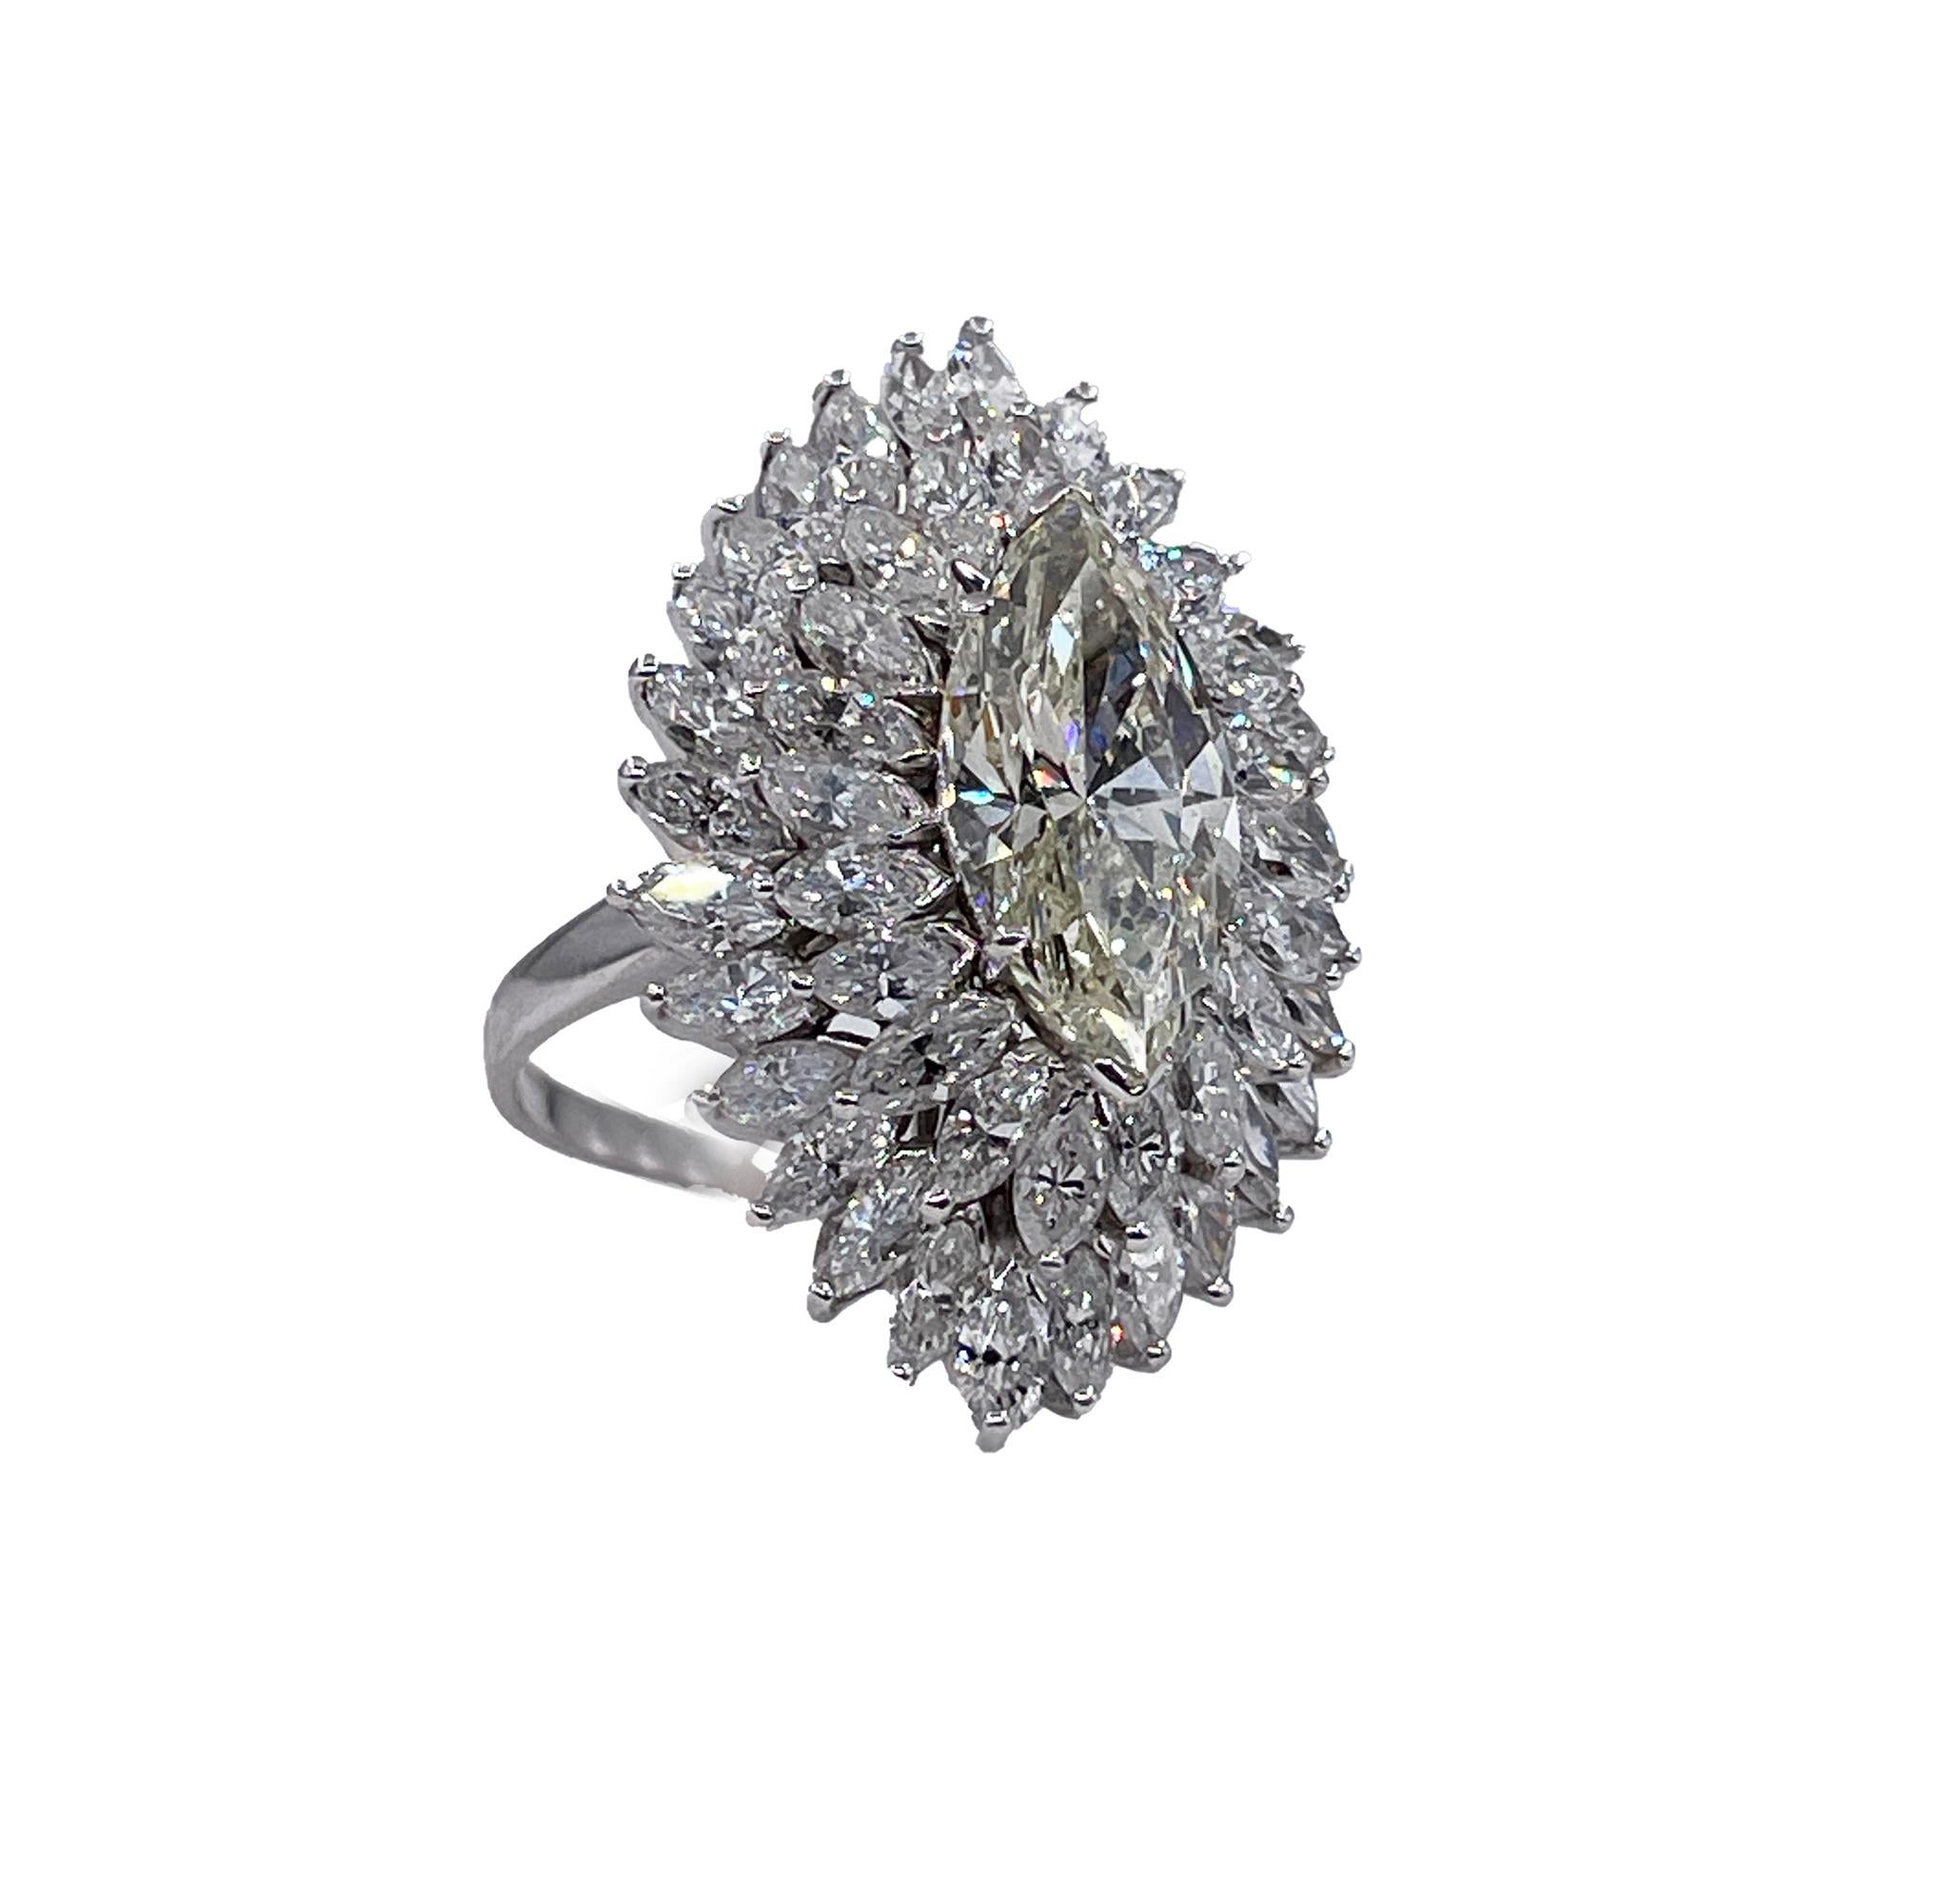 AN ICONIC STYLE- Original RING-DANT by Palais*** !!!
COLLECTORS ITEM: A BREATHTAKING CIRCA 1960s ESTATE 